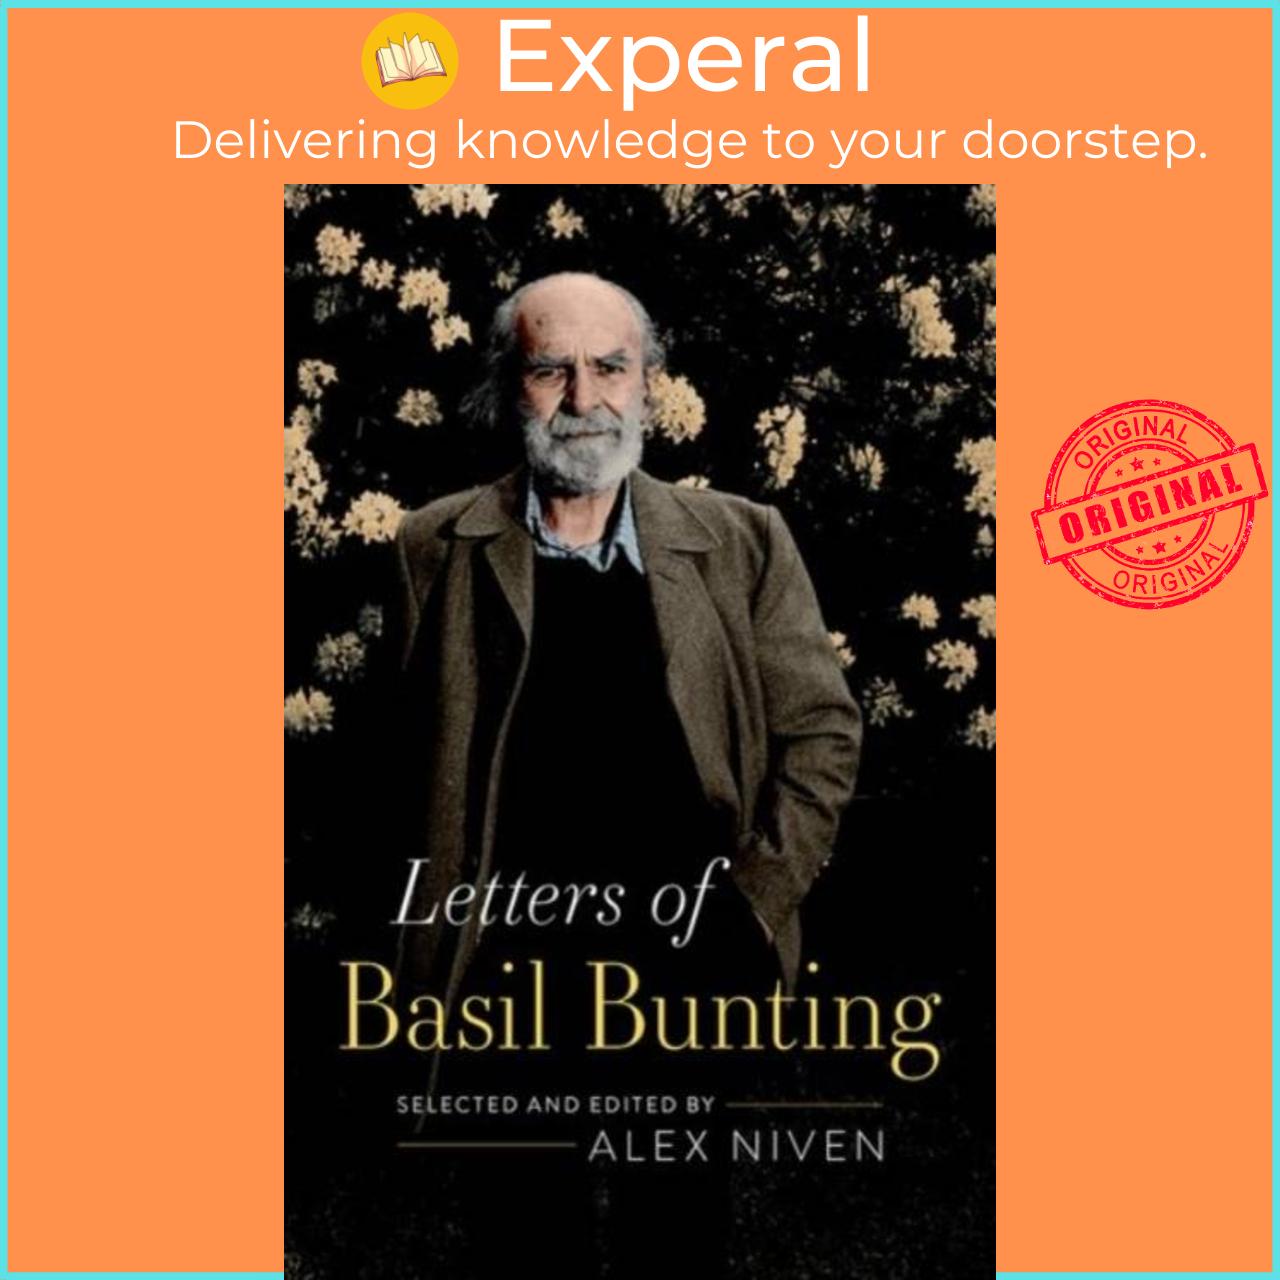 Hình ảnh Sách - Letters of Basil Bunting by Alex Niven (UK edition, hardcover)